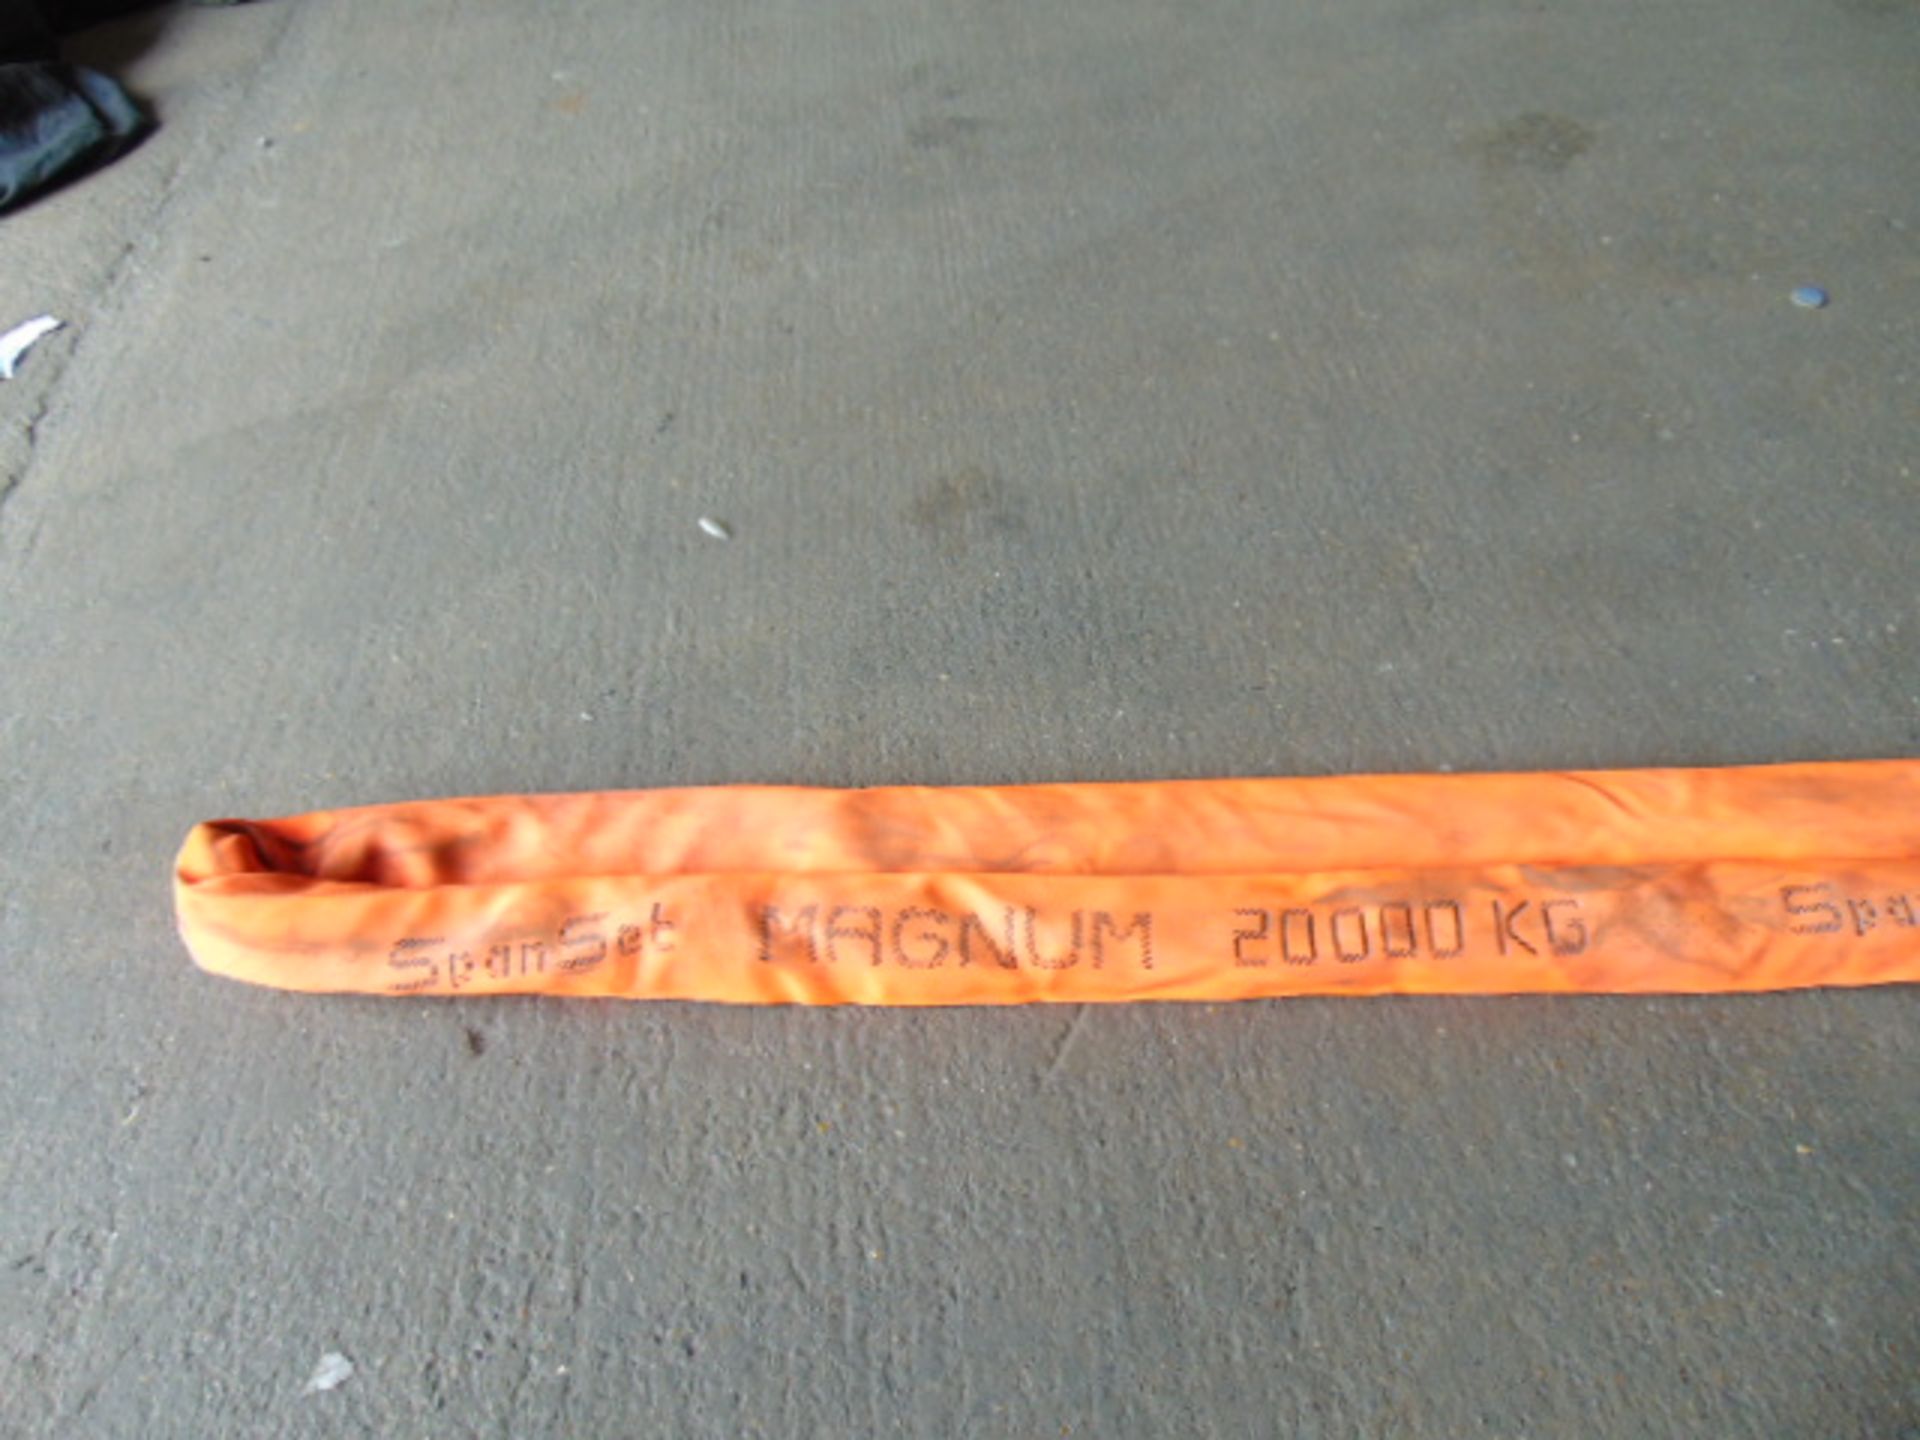 New Unused SpanSet Magnum 20,000kg Lifting/Recovery Strop from MOD - Bild 2 aus 6